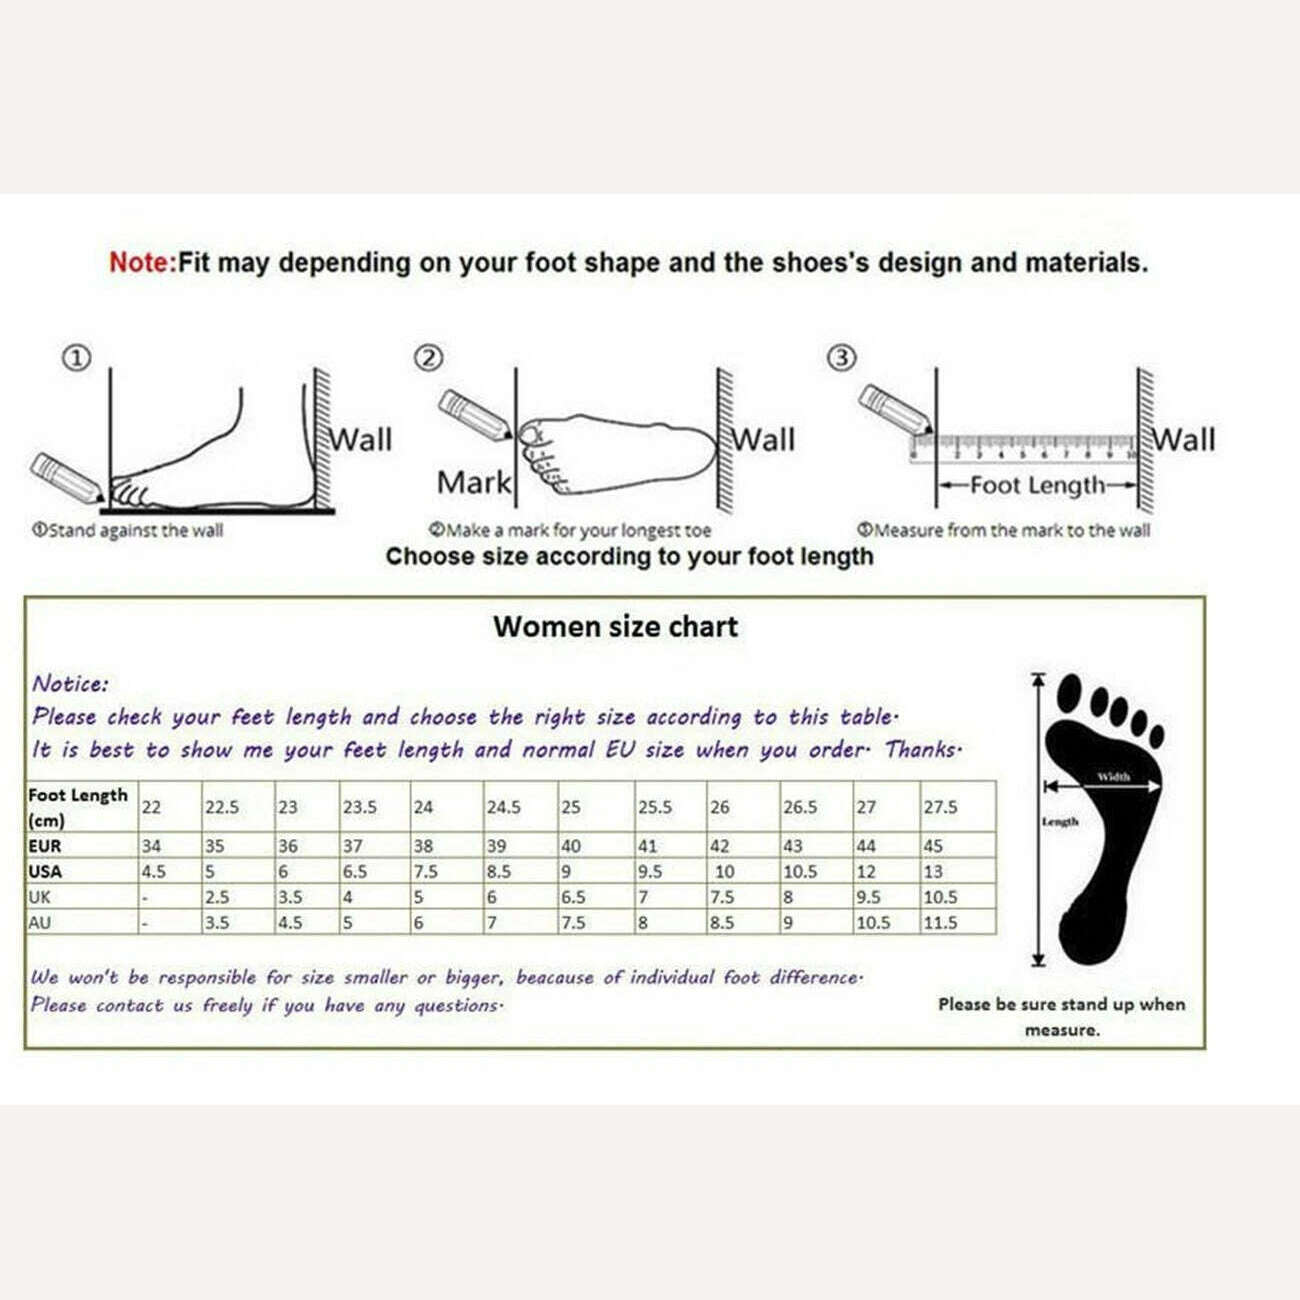 KIMLUD, Sestito Women Sexy Side Zipper Thigh High Boots Female Belt Trousers Boots Ladies Flock Pointed Toe Suqare High Heels Boots, KIMLUD Women's Clothes